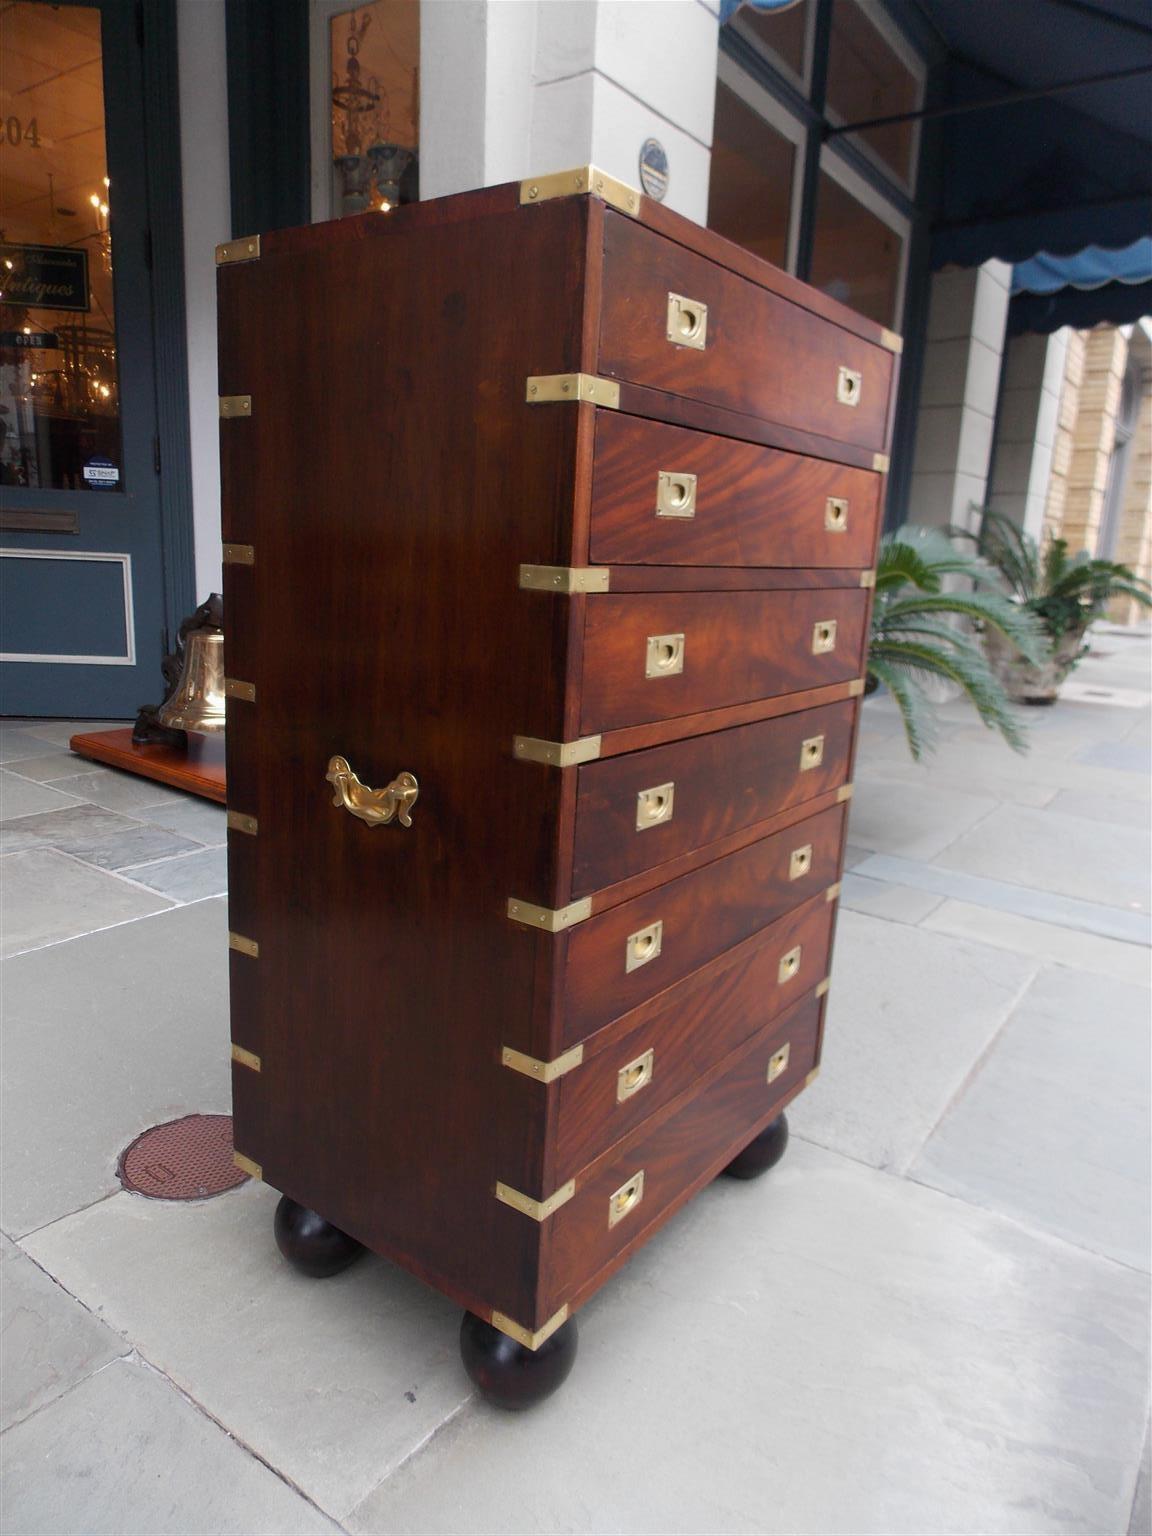 English mahogany military campaign seven drawer tall chest with original brass side handles, brass mounts, recessed brasses, and resting on the original bun feet, Late 19th century.